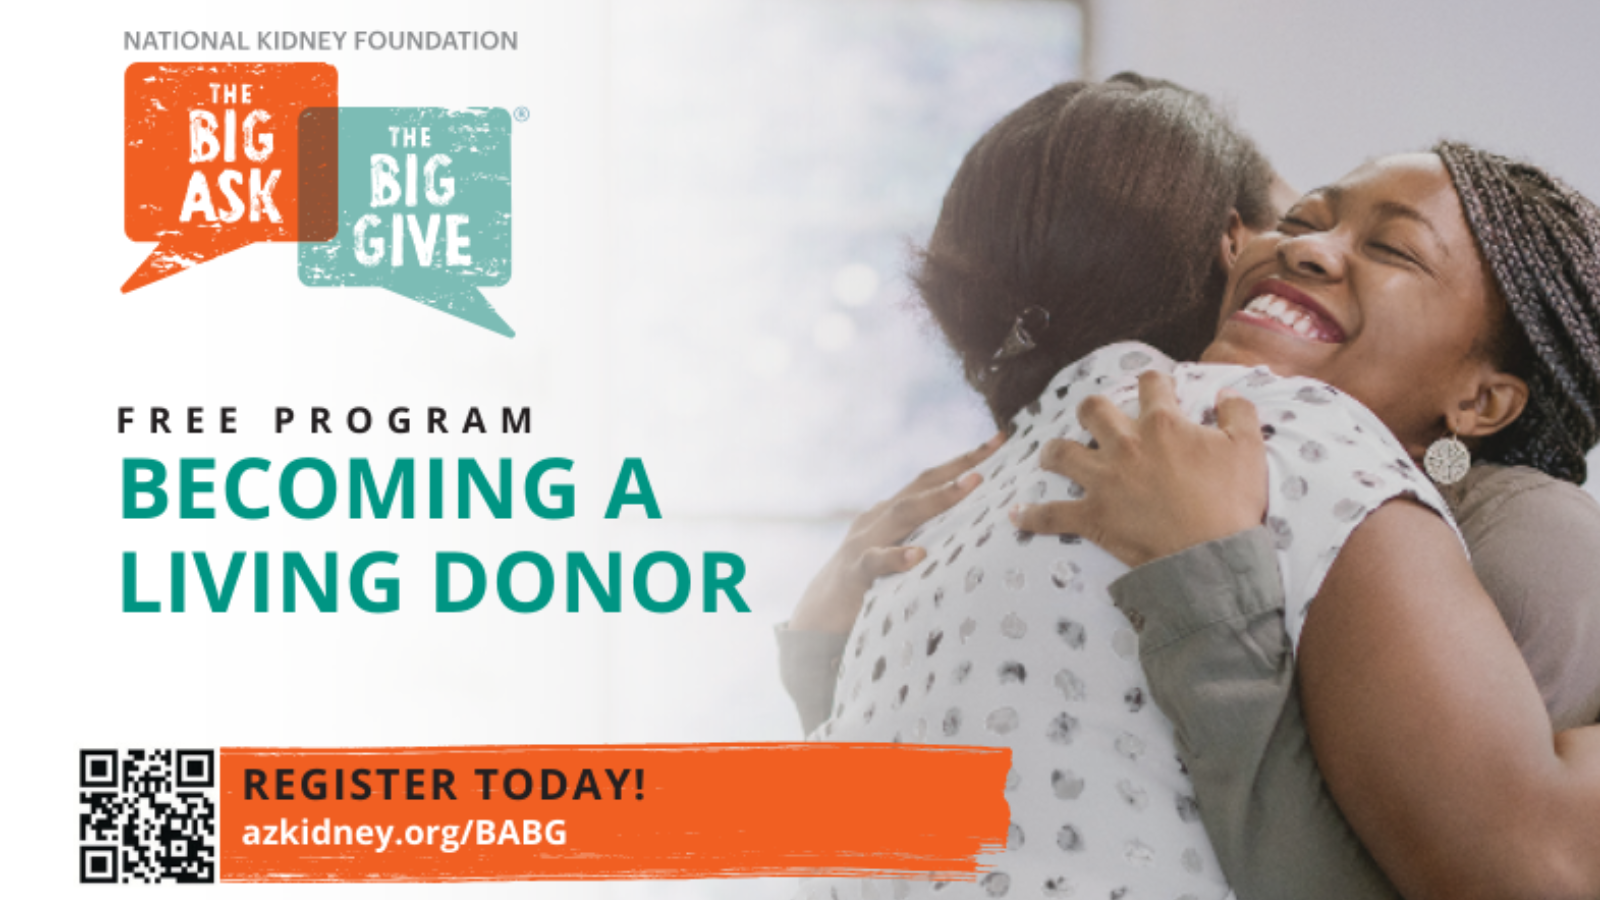 The Big Ask: The Big Give | Becoming a Living Donor